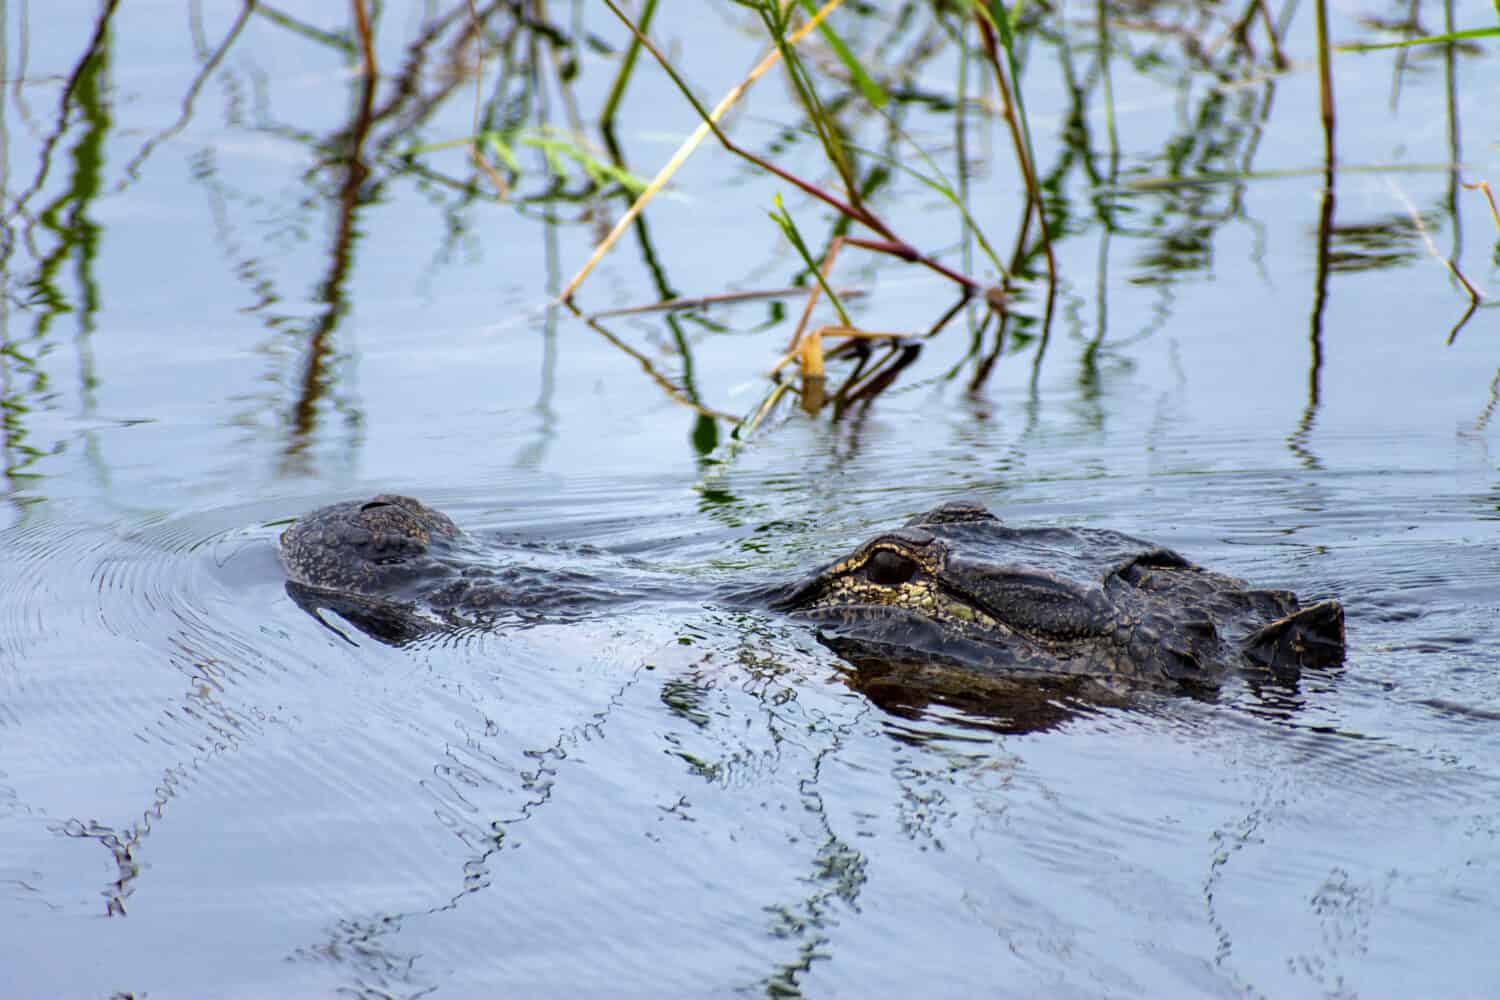 Alligator head poking out of the Water